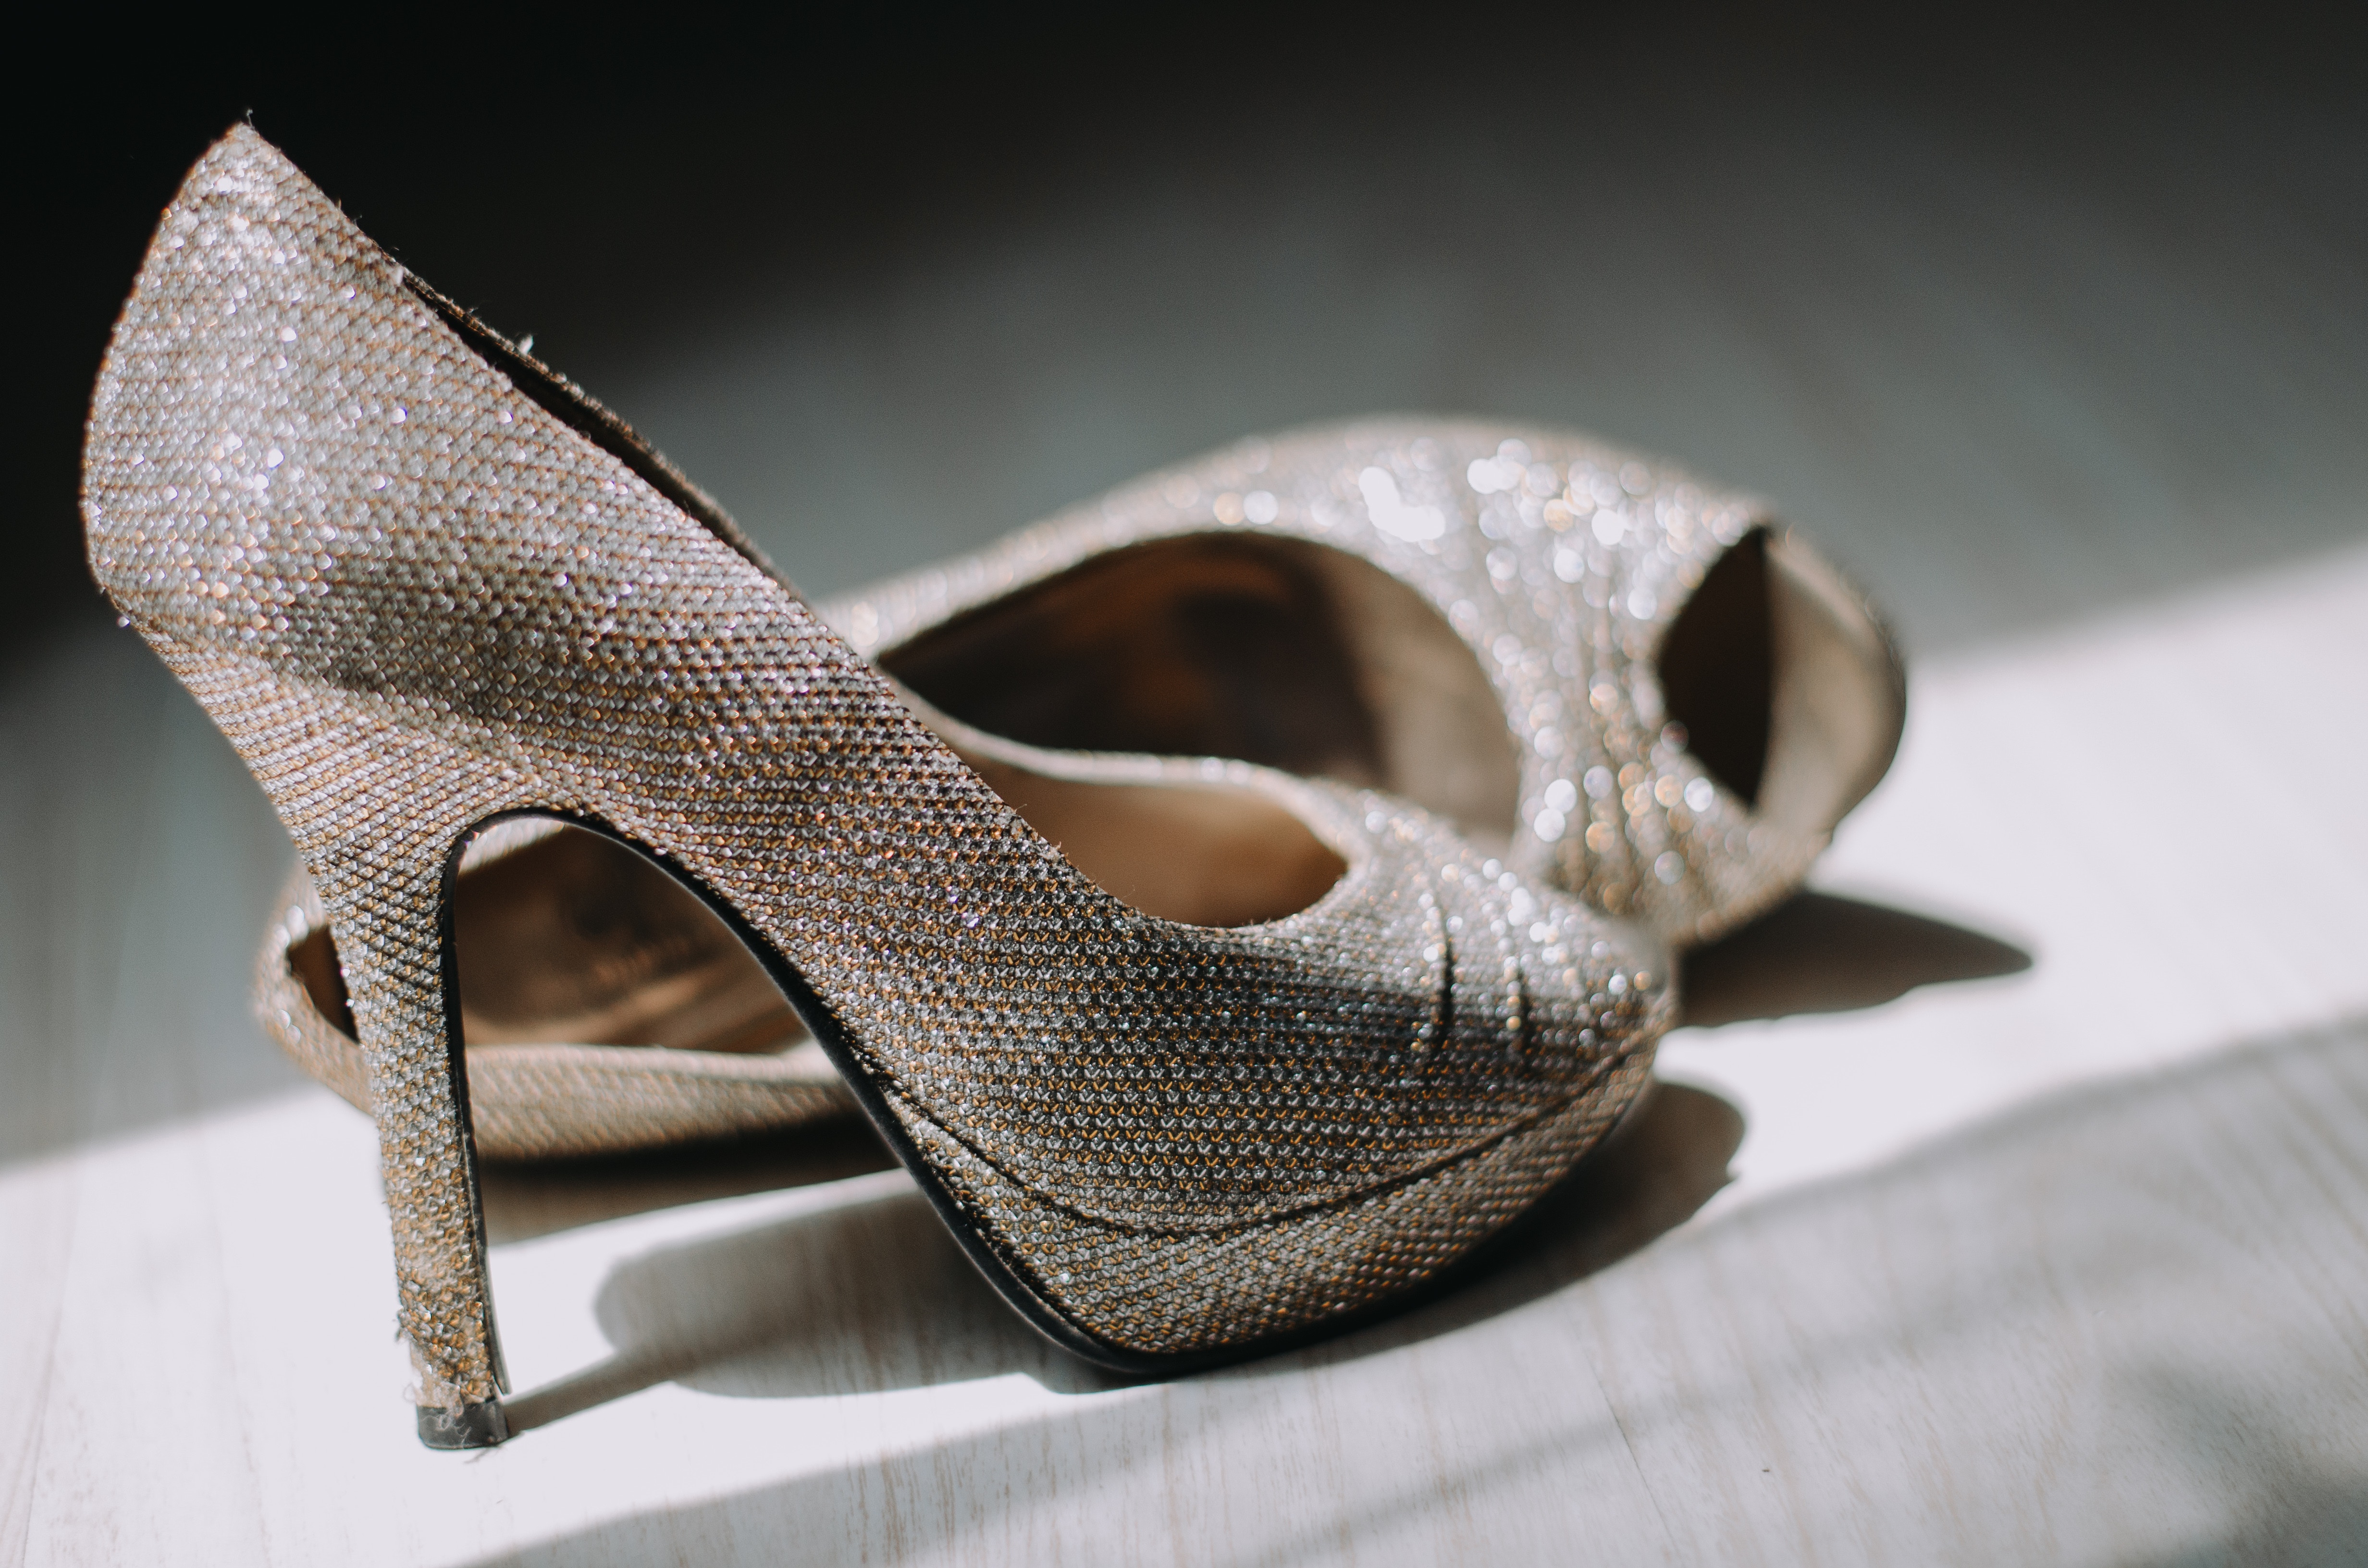 Protect Wood Flooring from High Heels